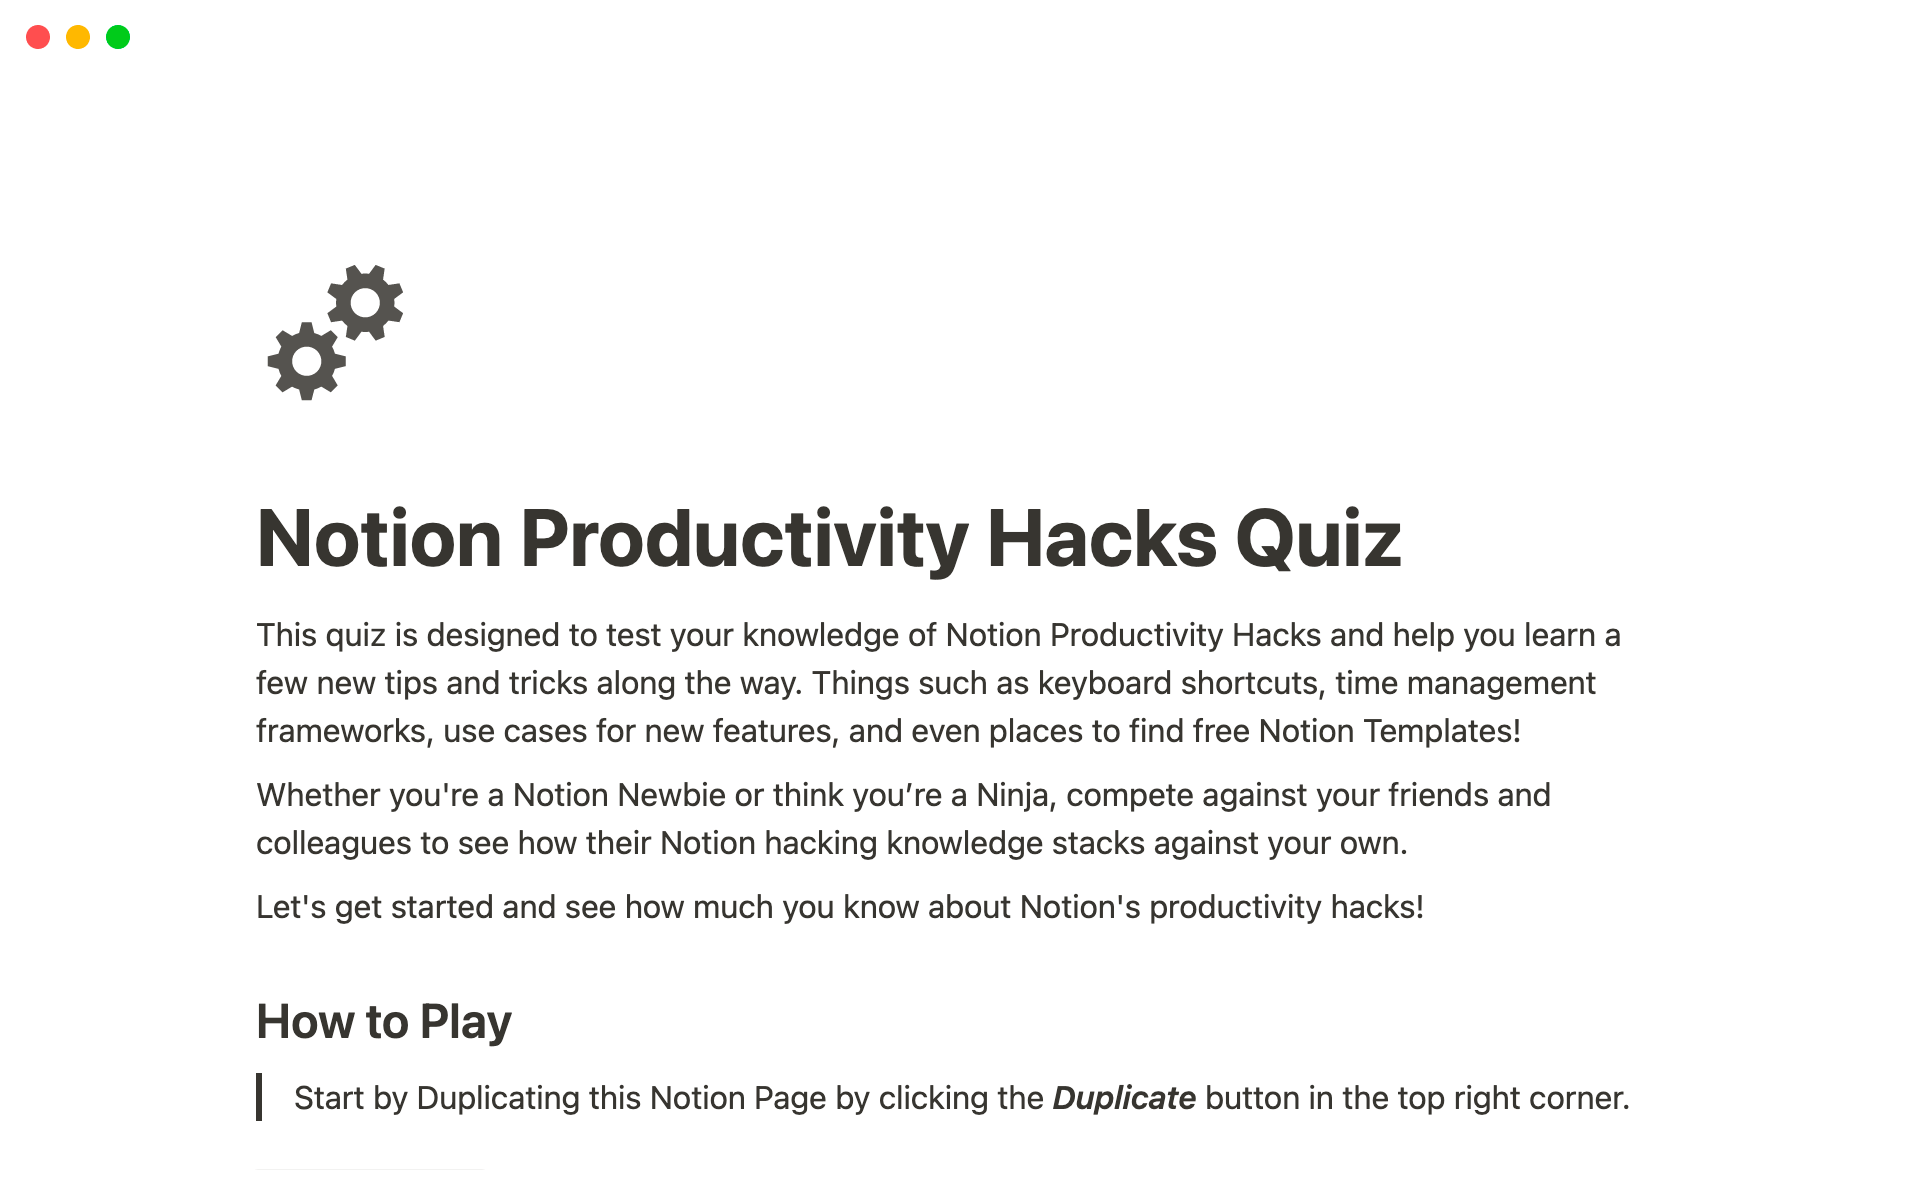 Supercharge your productivity with the Notion Productivity Hacks Quiz and unlock your full potential!